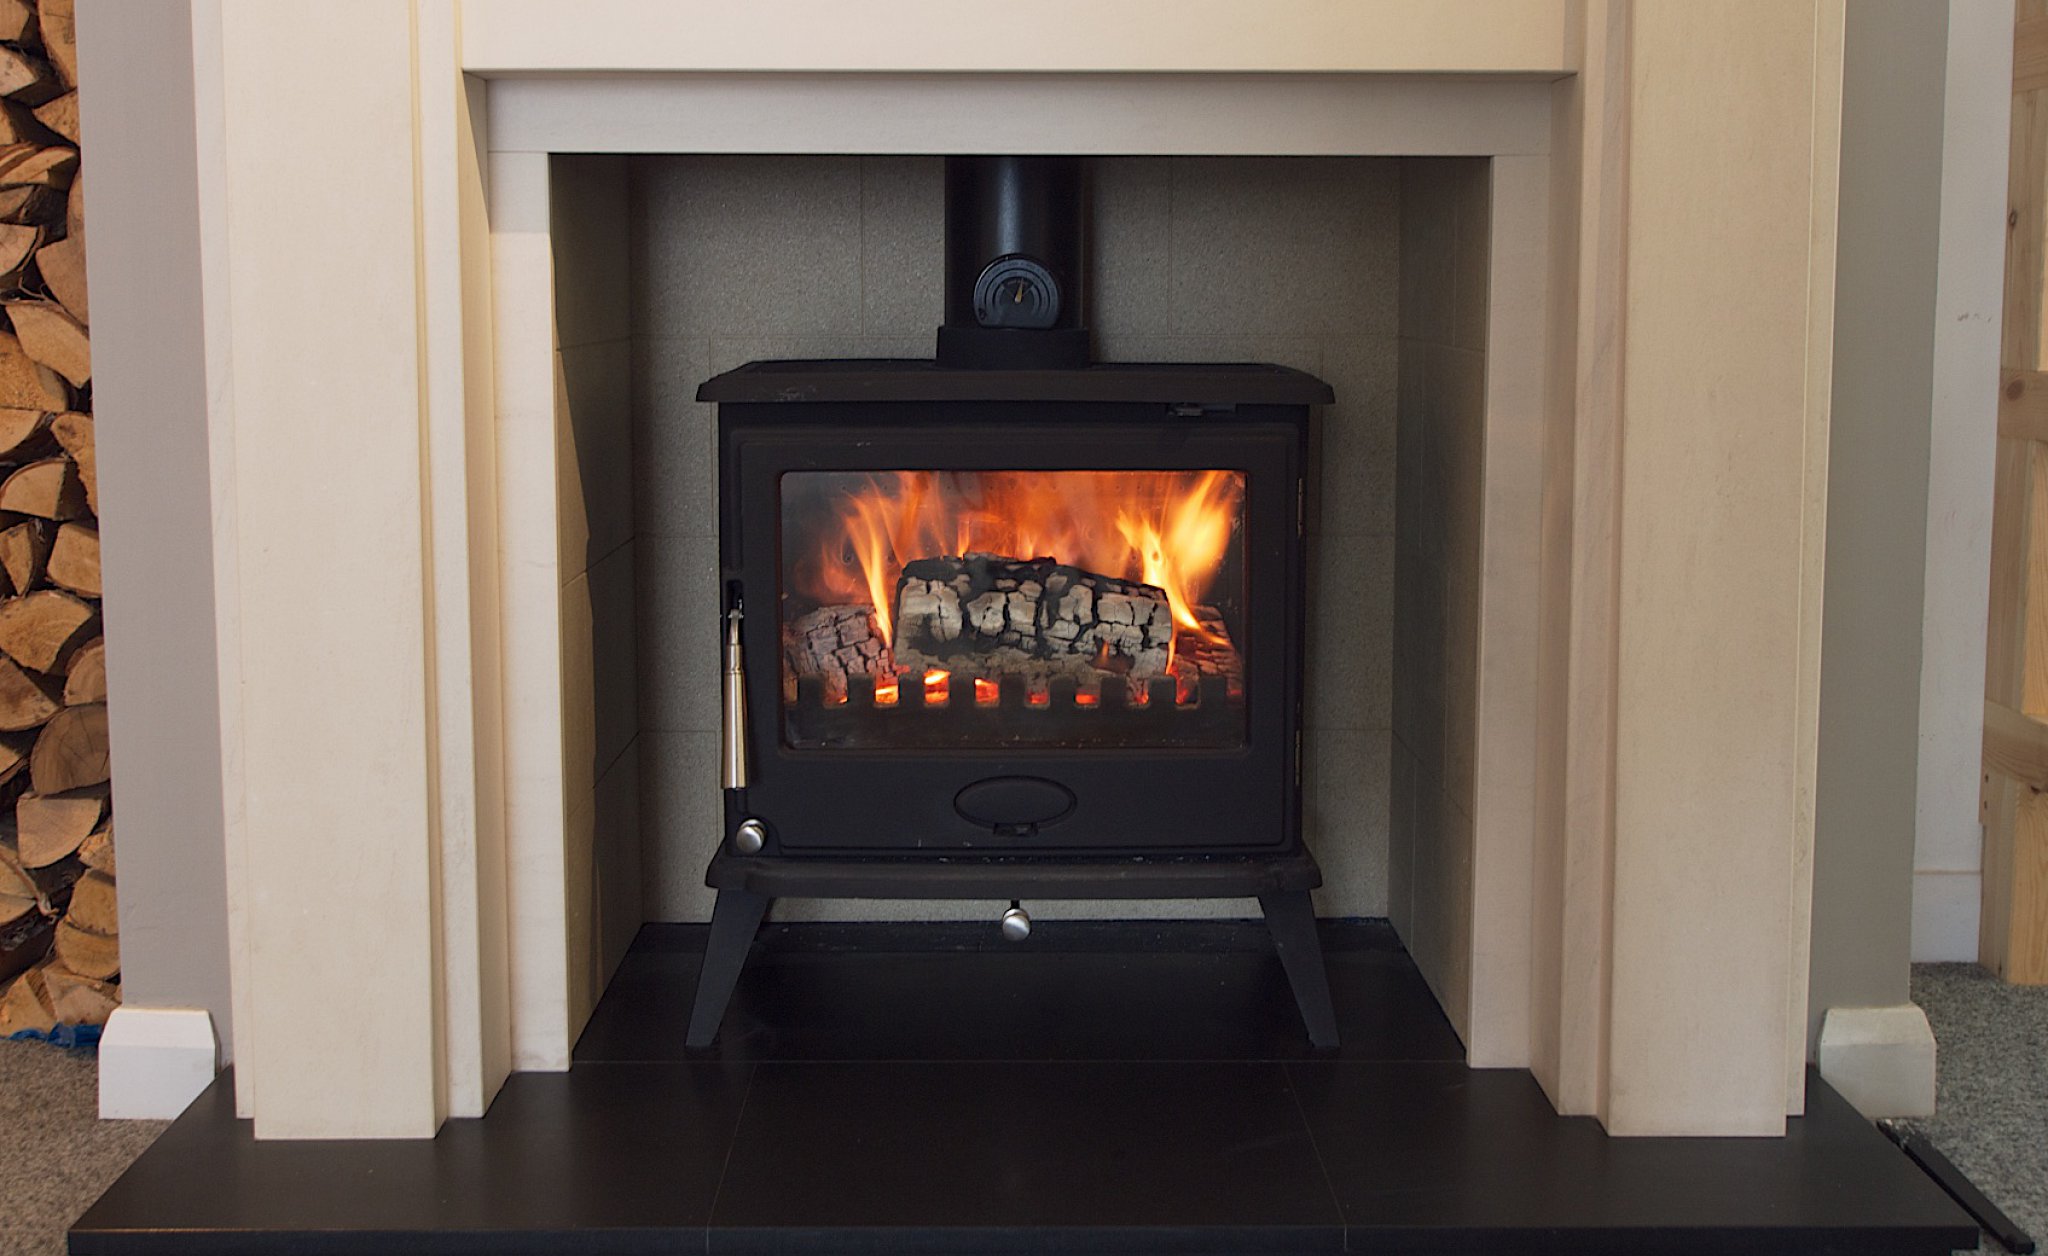 A Newman wood burning stove burning efficiently with kiln dried logs